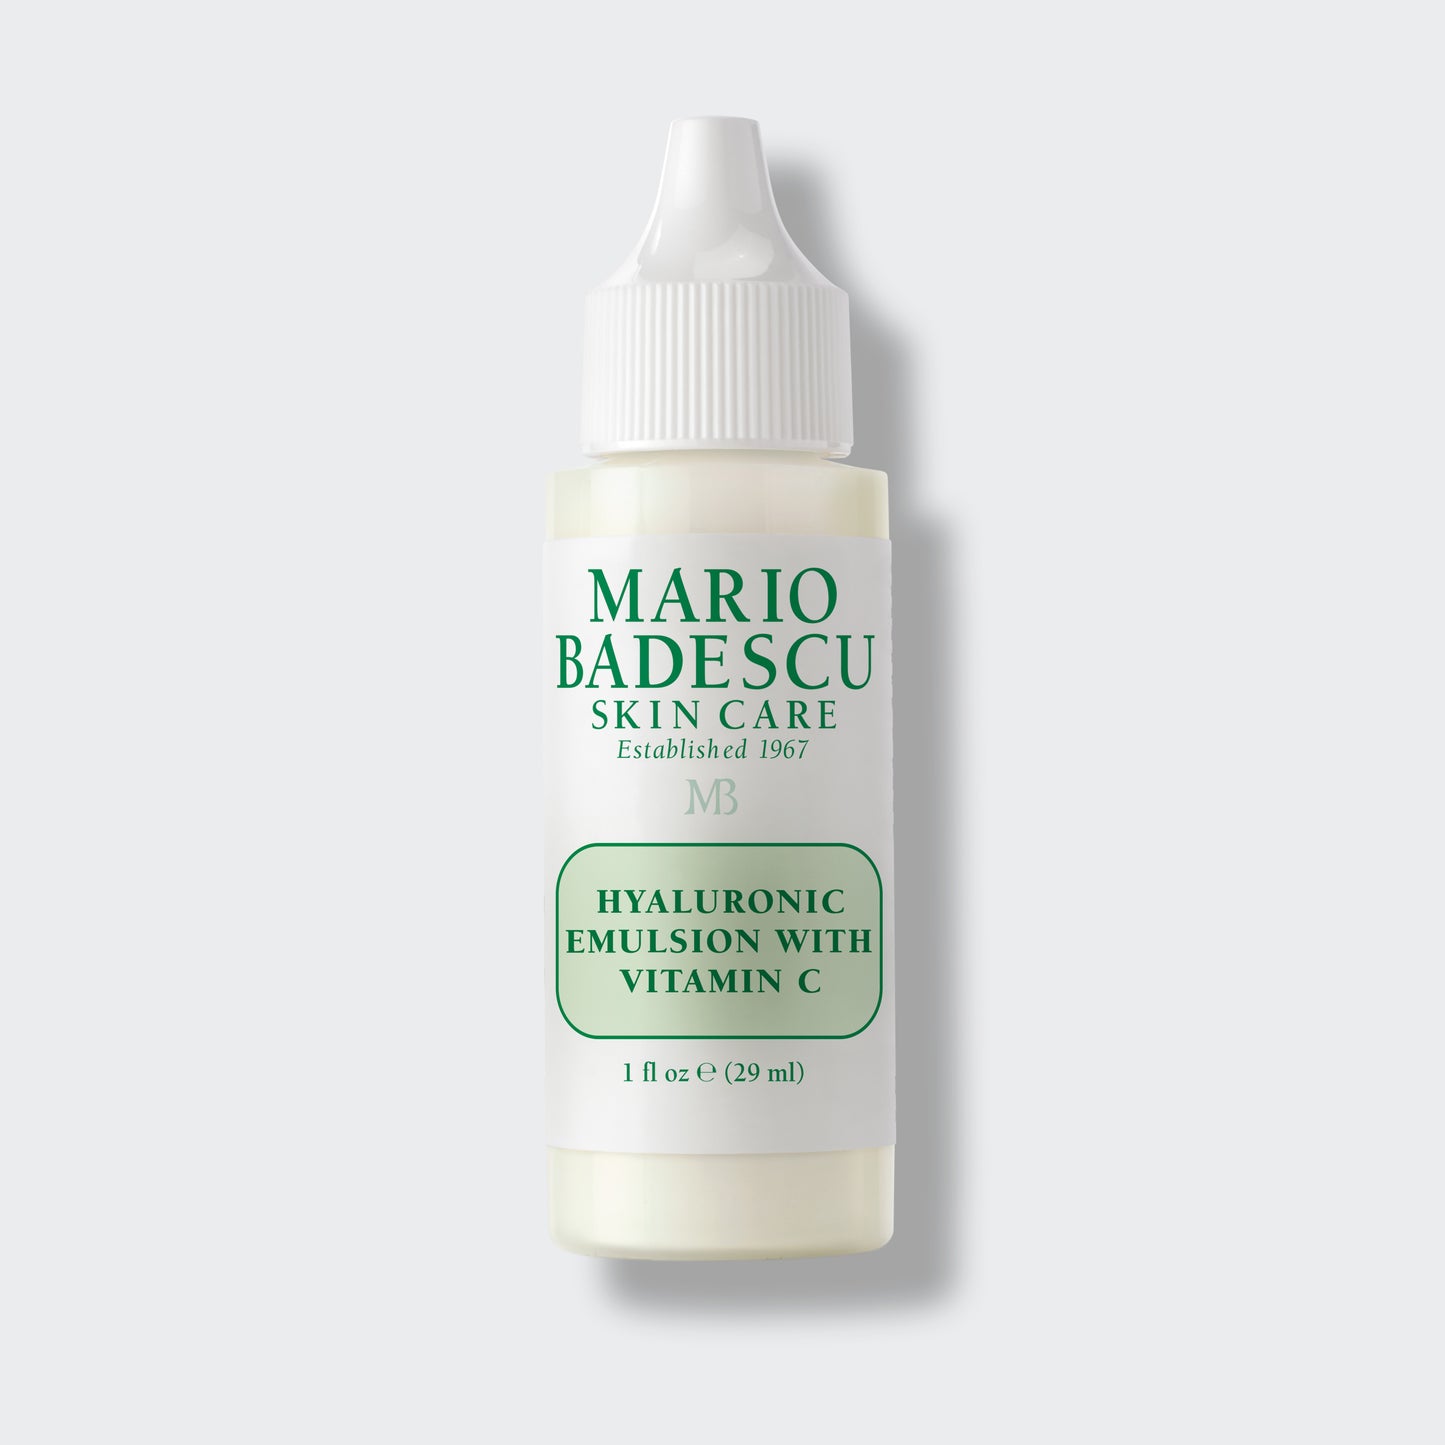 Mario Badescu Hyaluronic Emulsion with Vitamin C